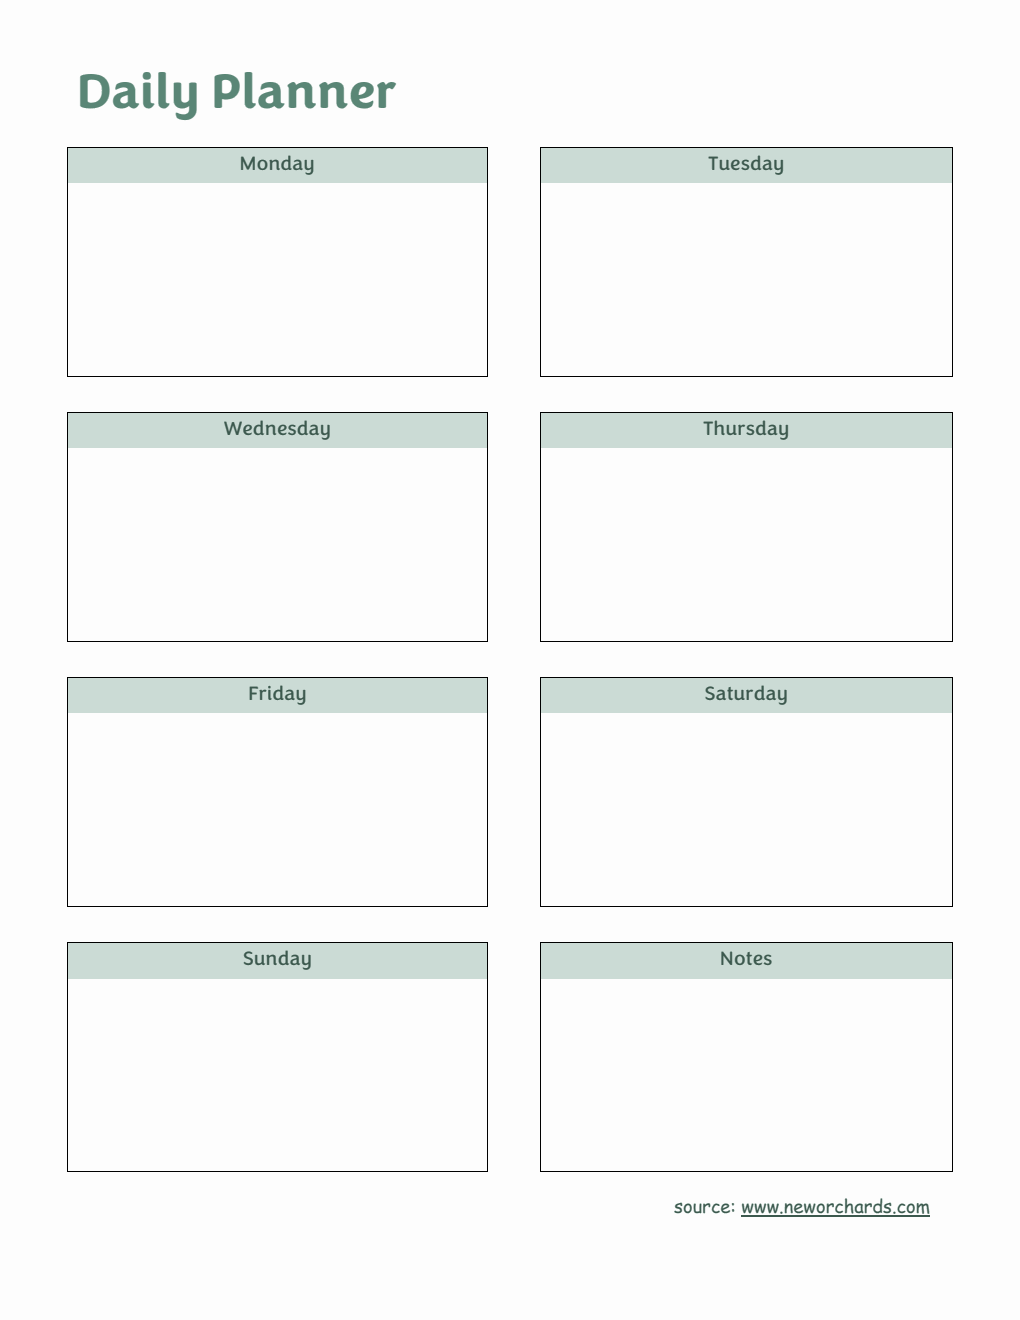 Daily Planner Template Editable in Word